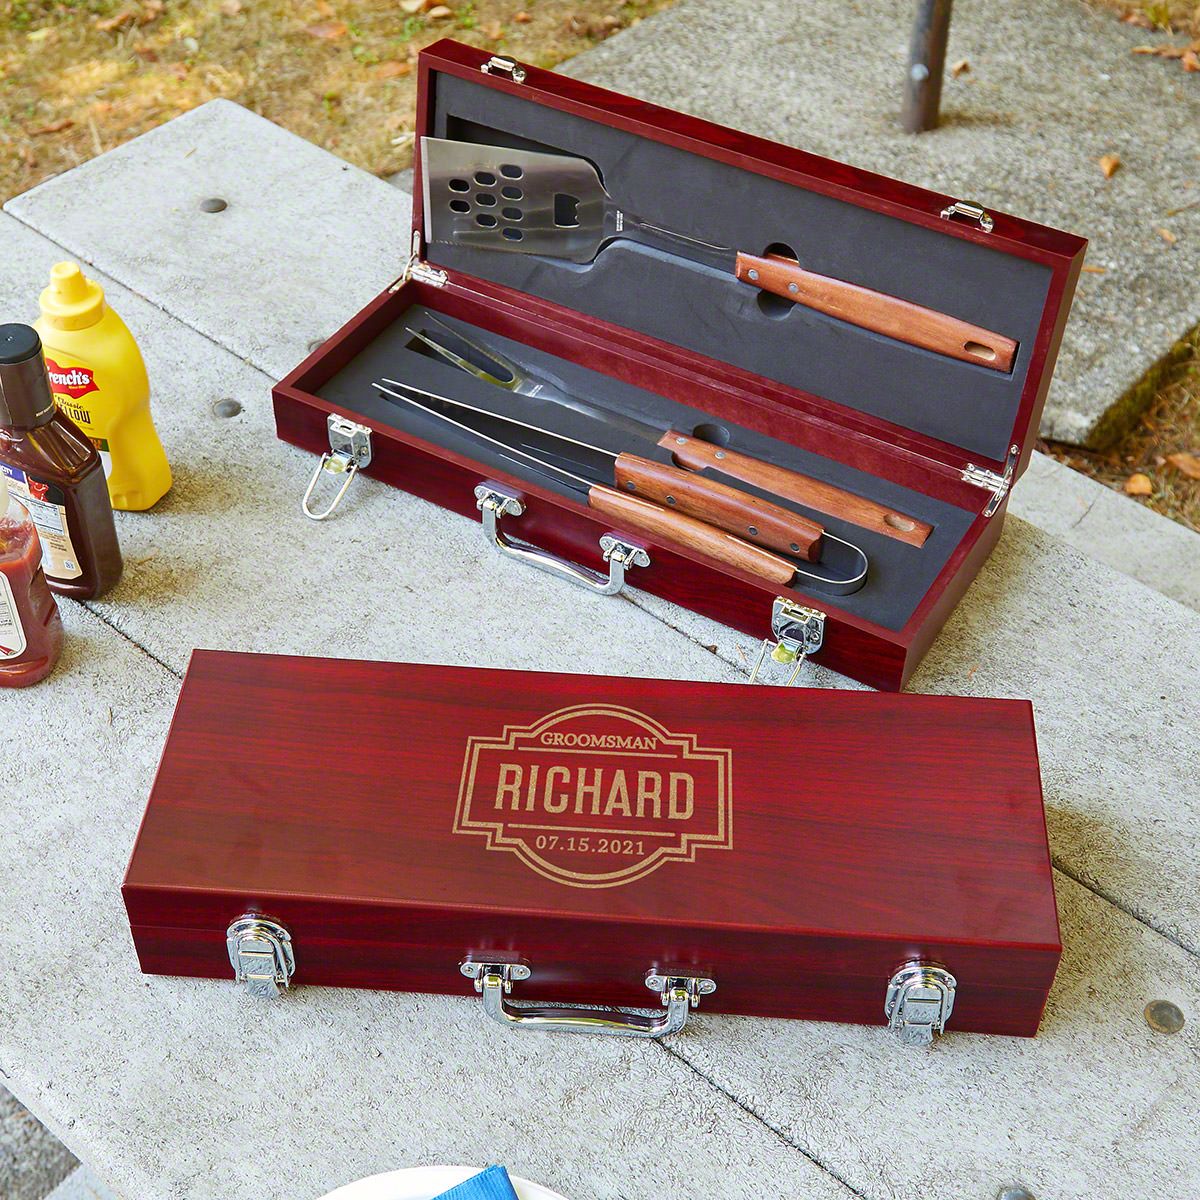 BBQ set will be a great wedding gift for your stepson and his bride